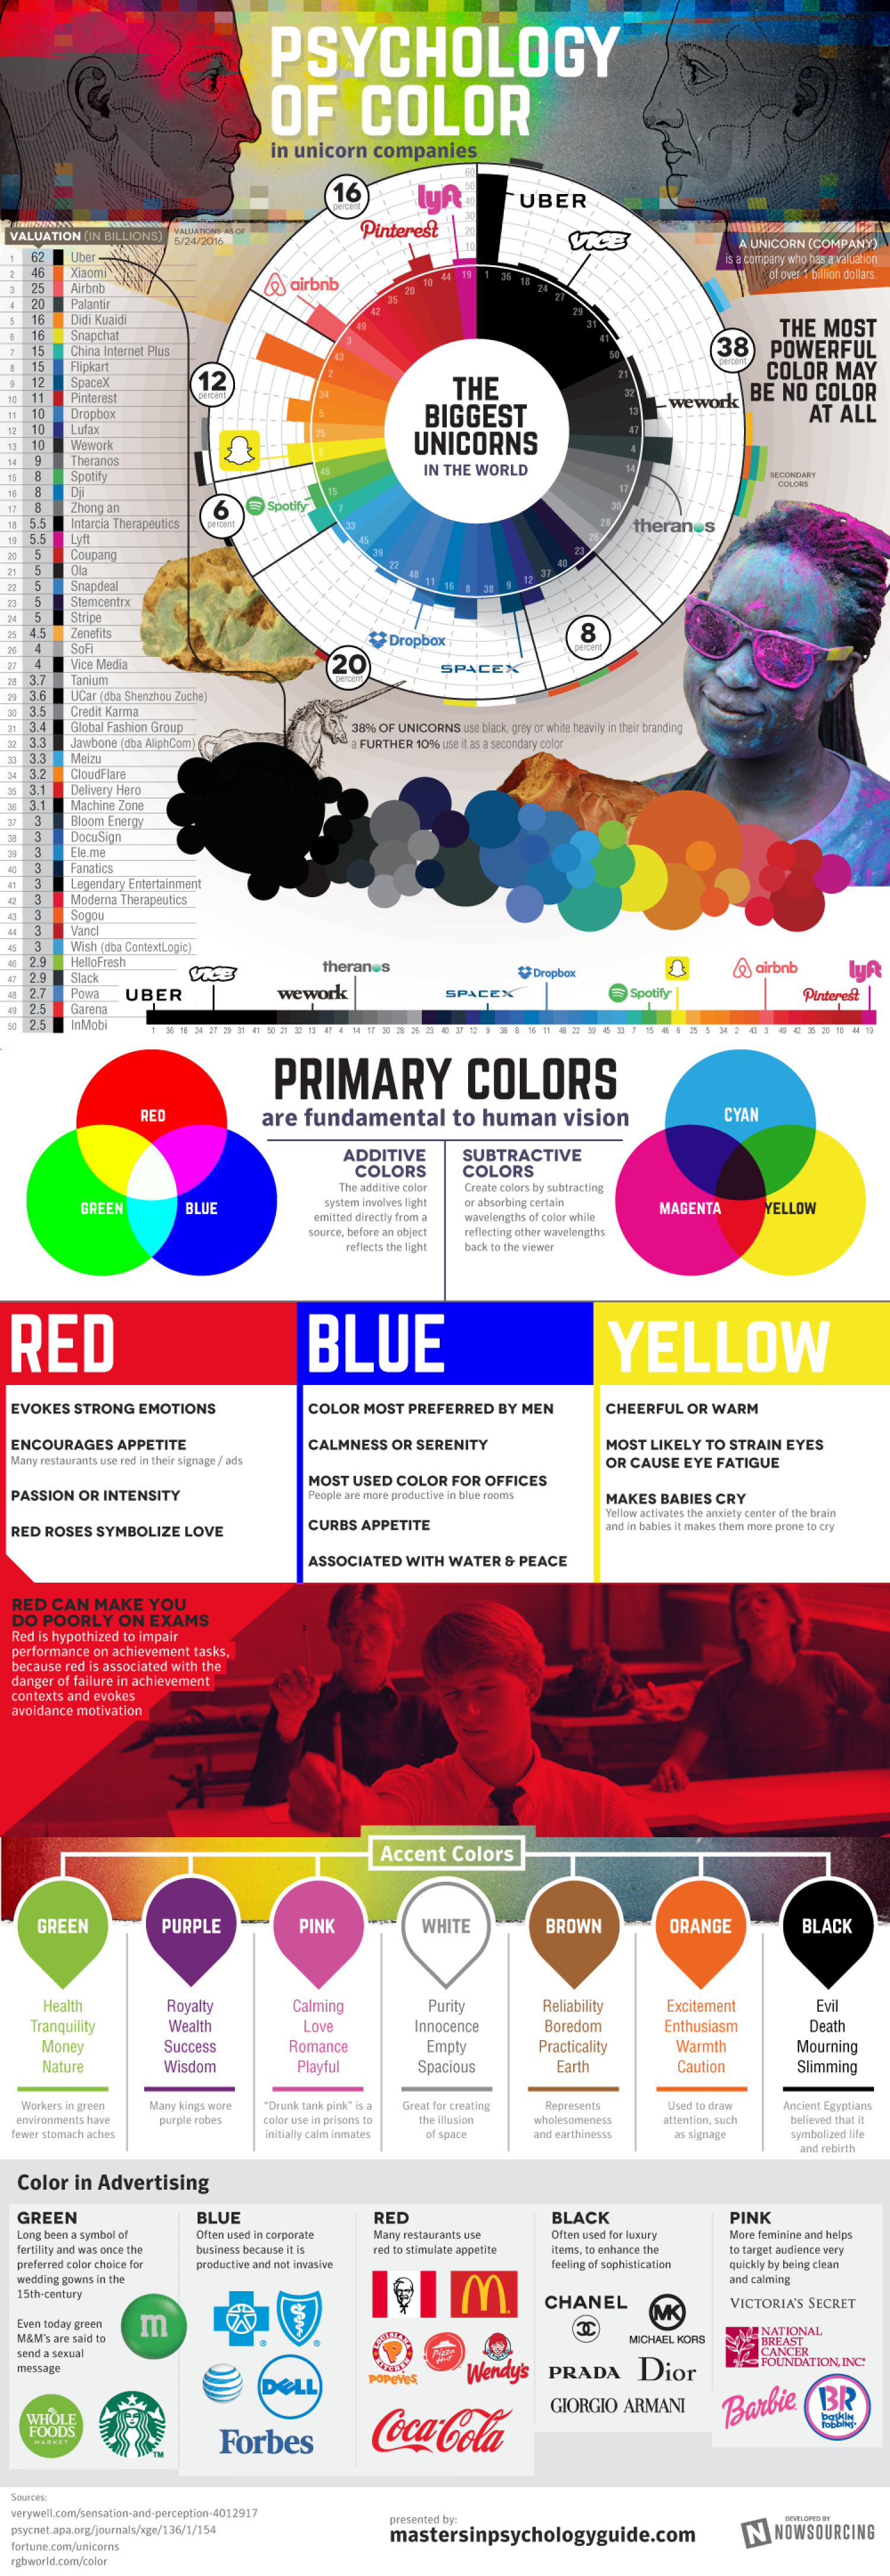 Unicorn Companies: How They Choose Their Colors Infographic